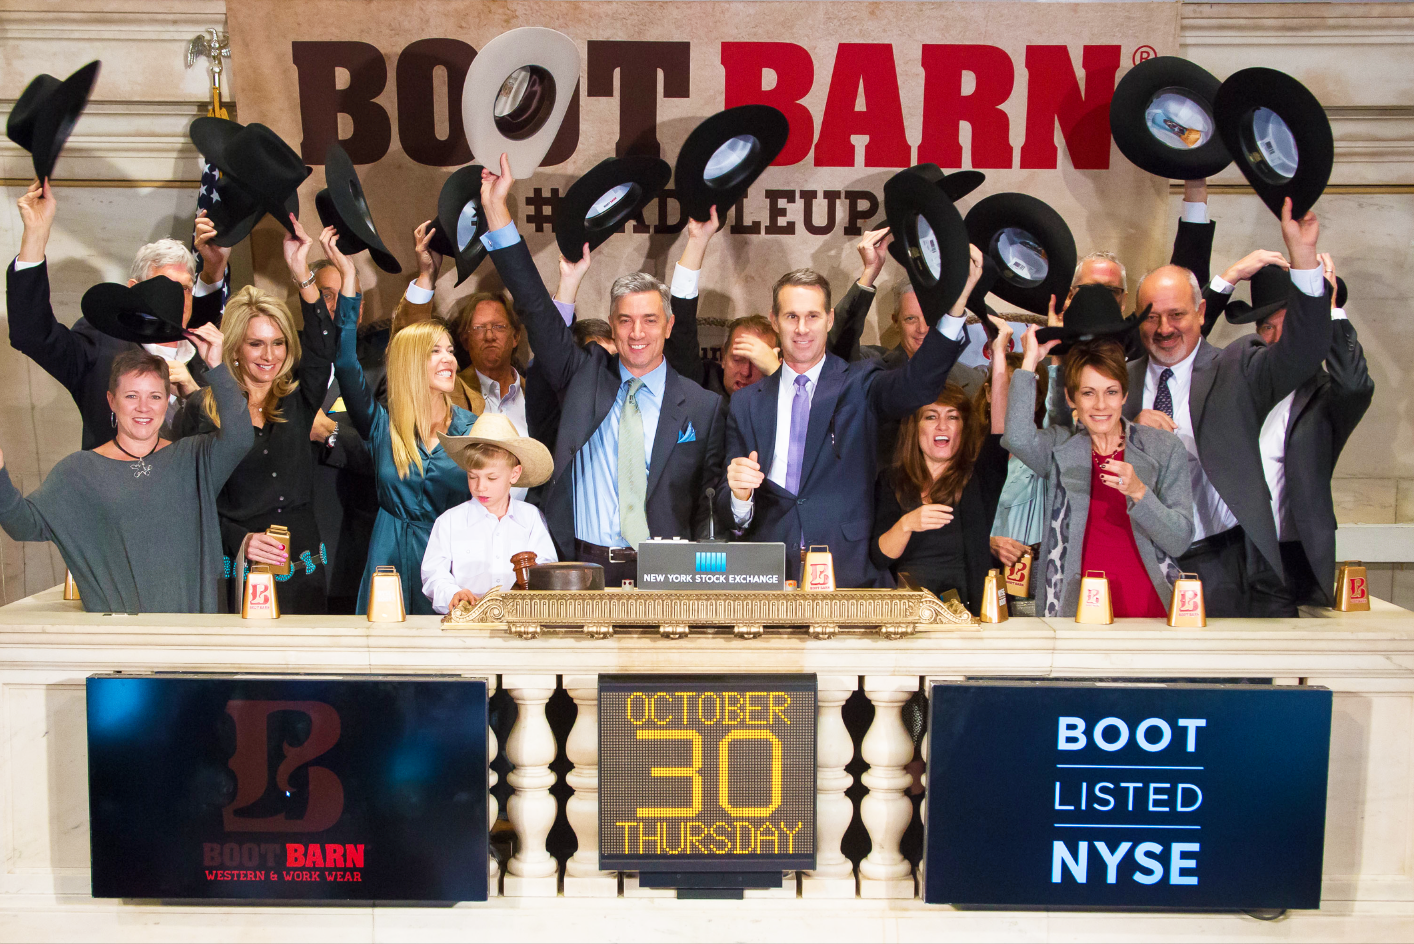 NYSE 🏛 on X: Today @bootbarn saddled up with the NYSE for their IPO.  Check out the first Yee Haw! at the bell #SaddleUp $BOOT   / X